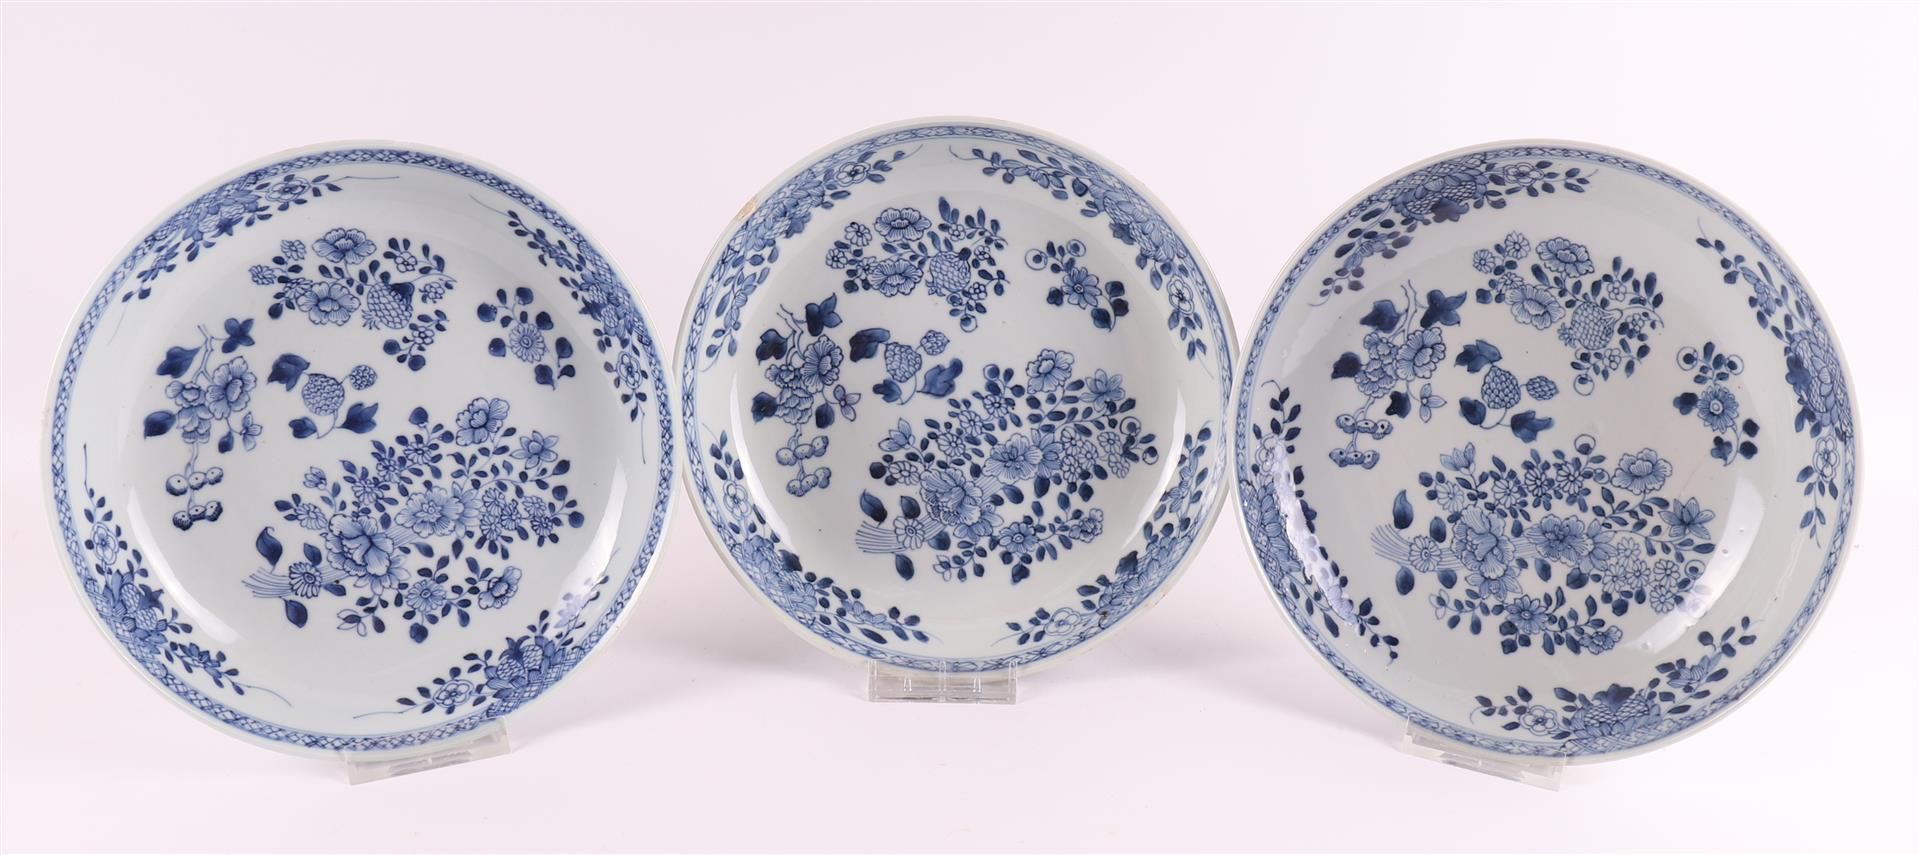 A series of three blue/white porcelain deep dishes, China, Qianlong